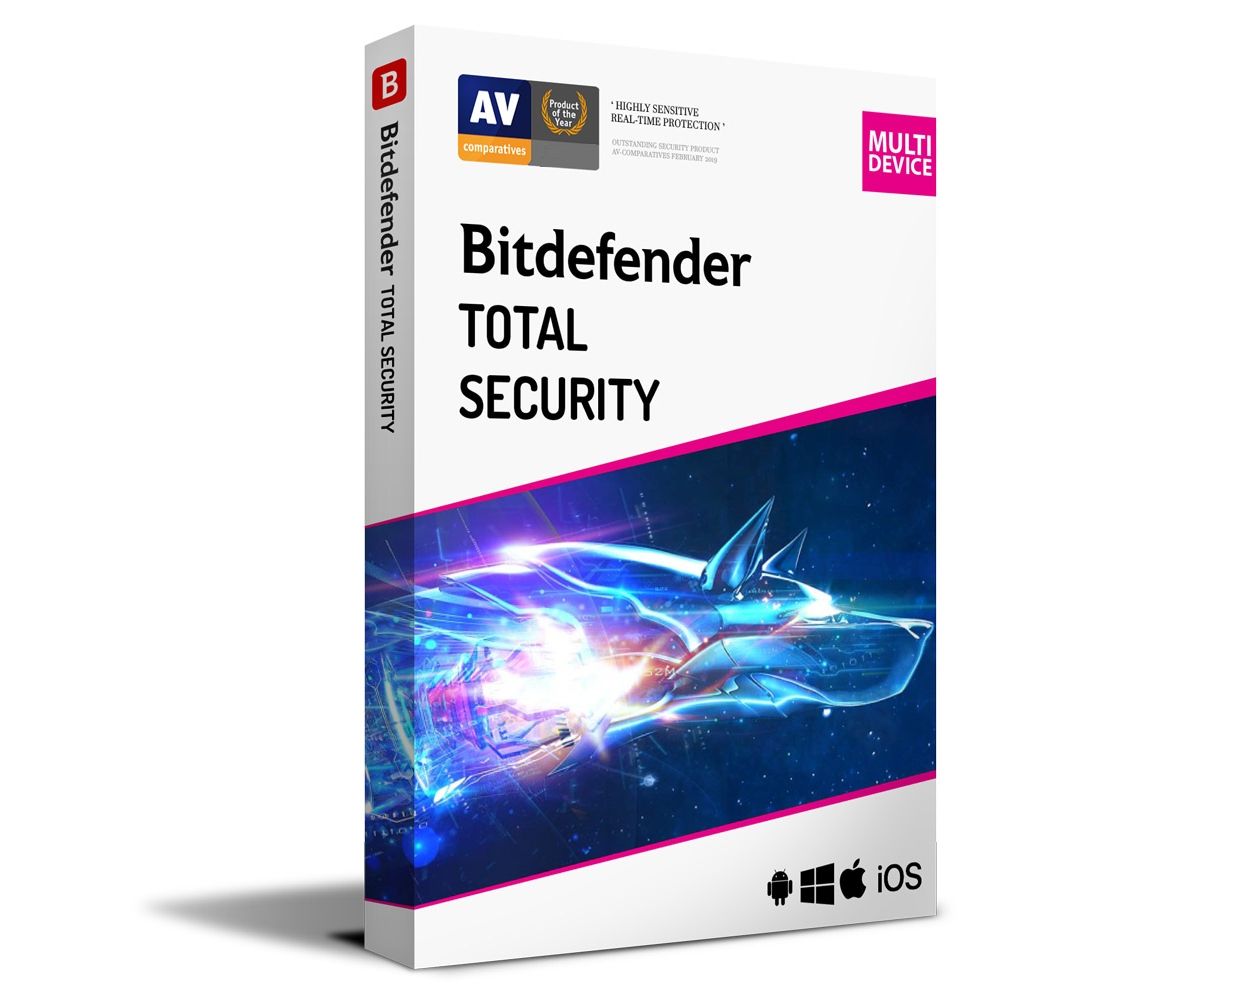 Get Ultimate Protection with Bitdefender Total Security!